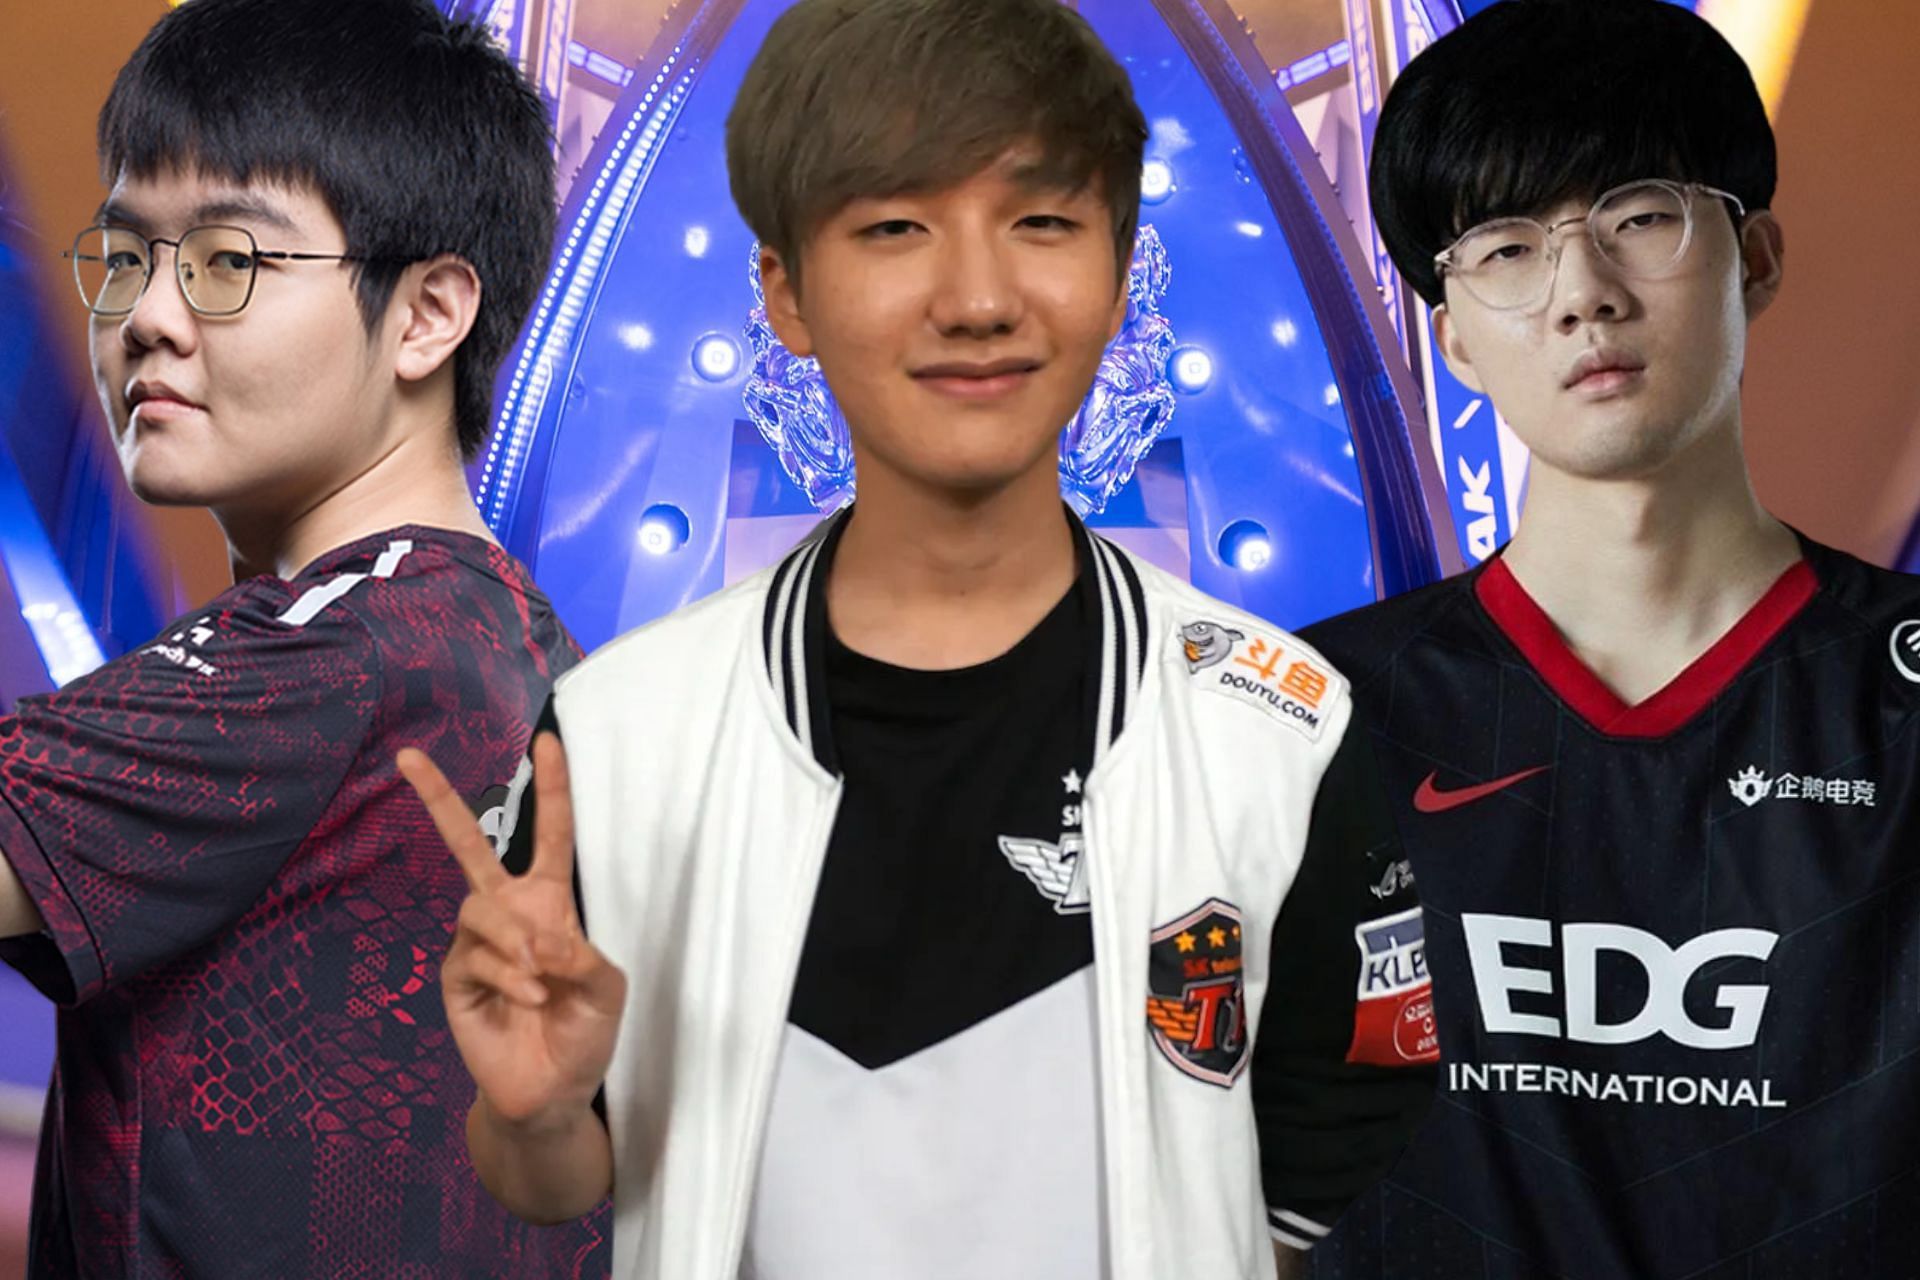 Players like Peanut, 369, and Viper have a chance to win MVP at Worlds 2022 (Image via Sportskeeda)